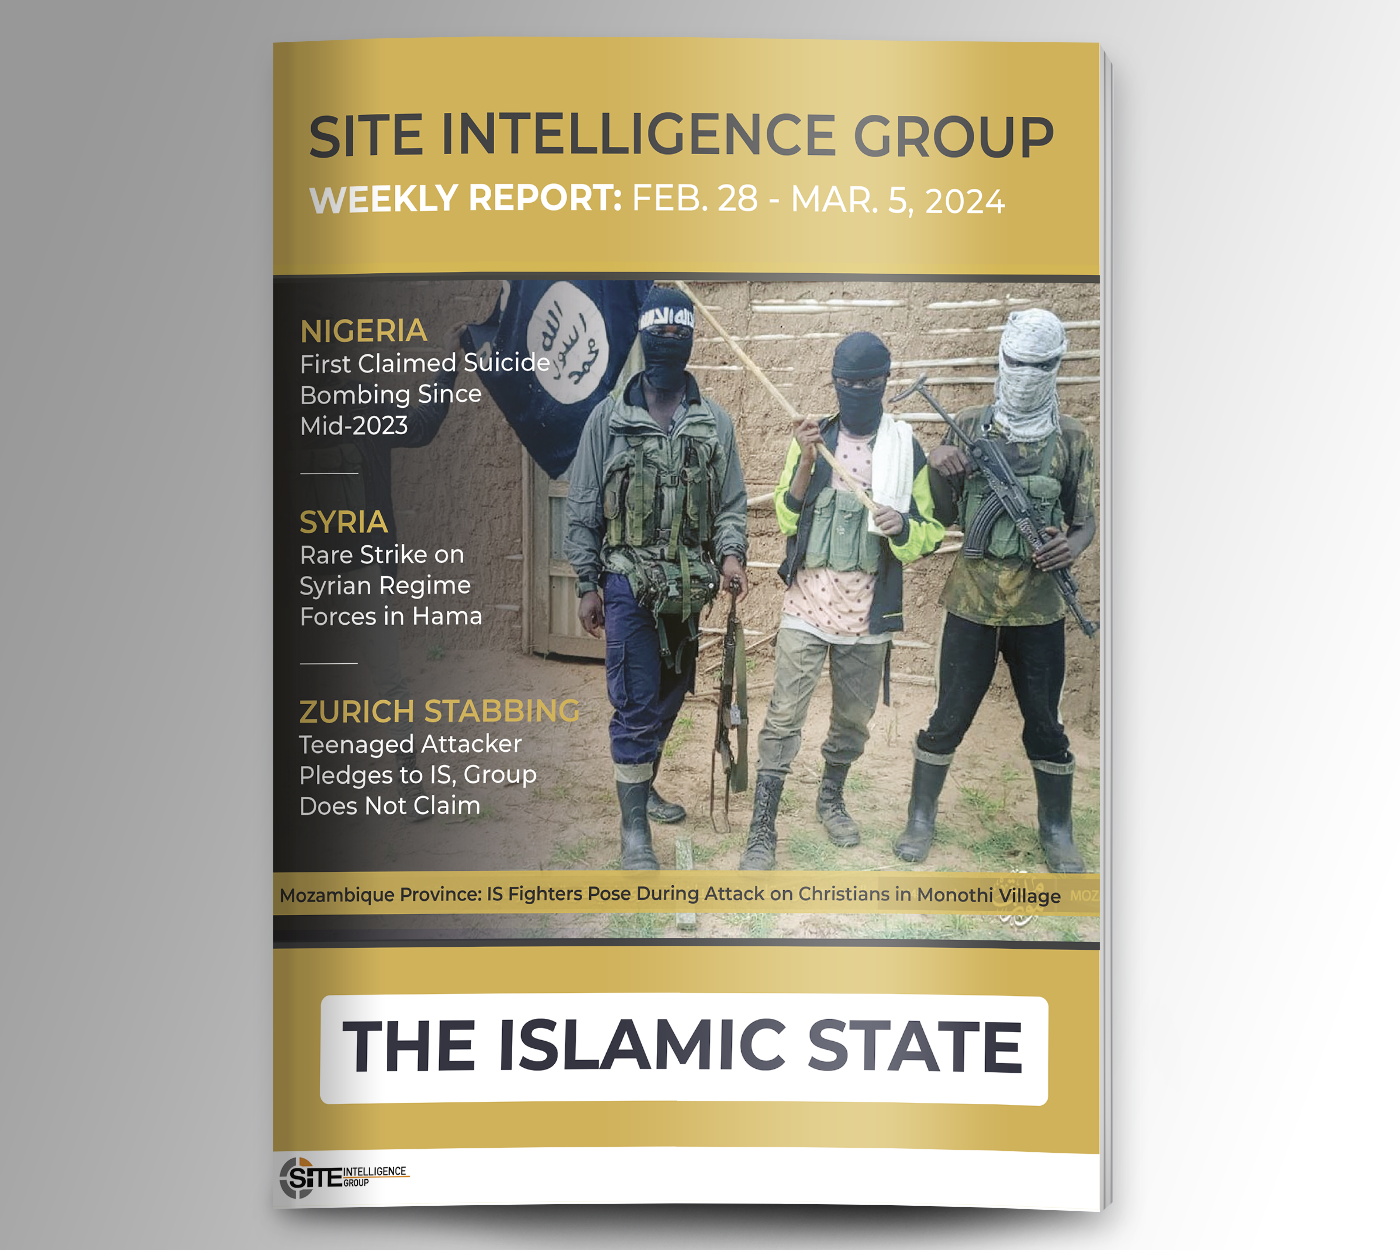 Weekly inSITE on the Islamic State for February 28-March 5, 2024